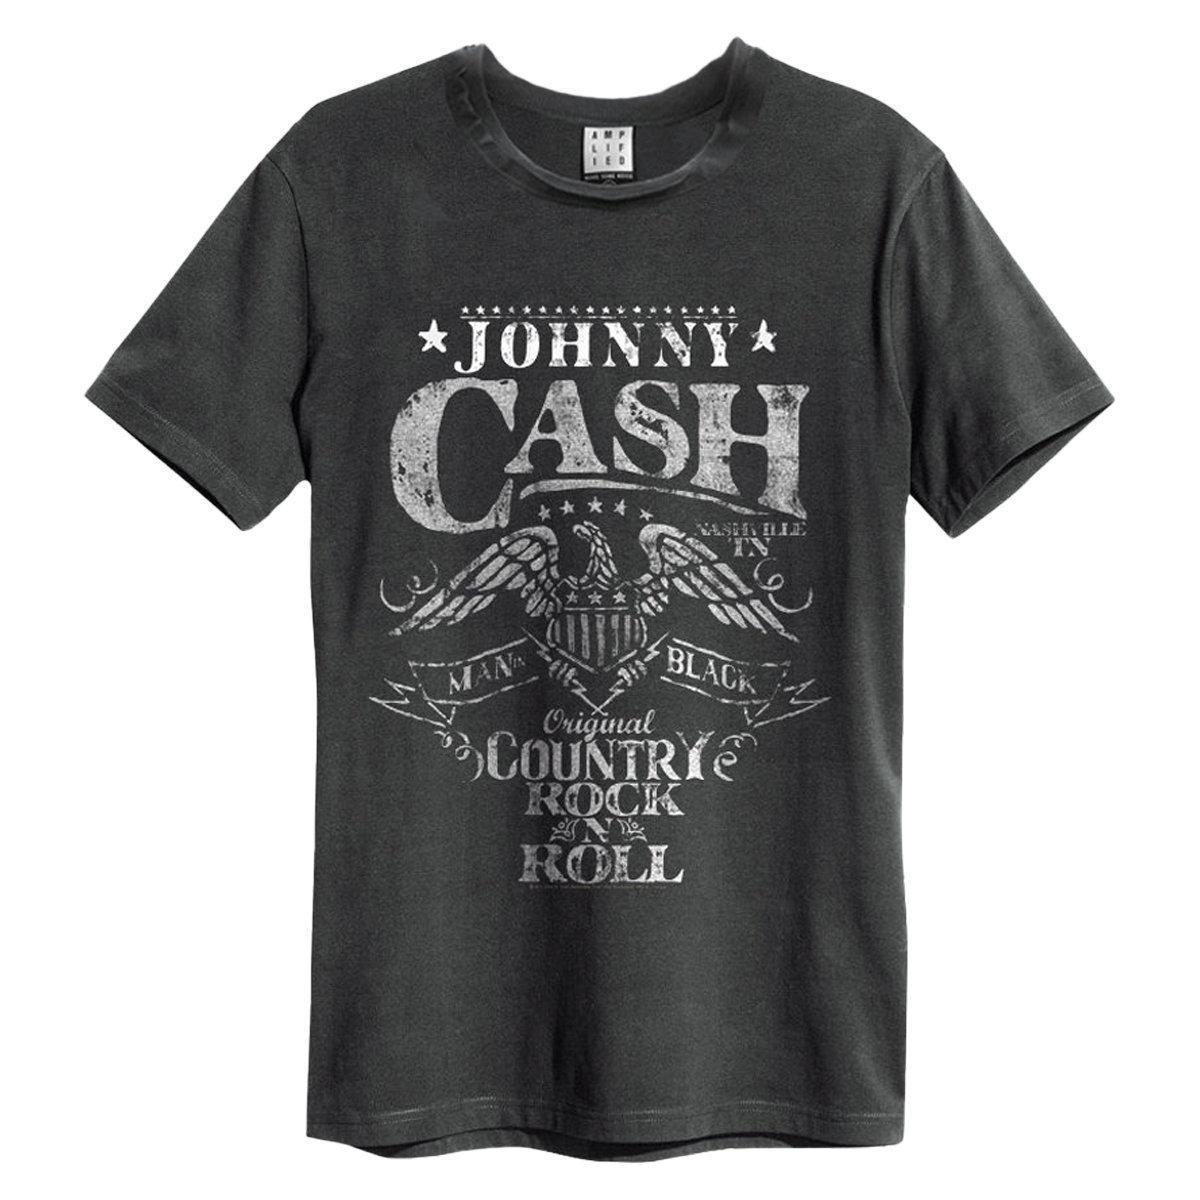 Amplified Unisex Adult Eagle Johnny Cash T-Shirt (Charcoal) (S)